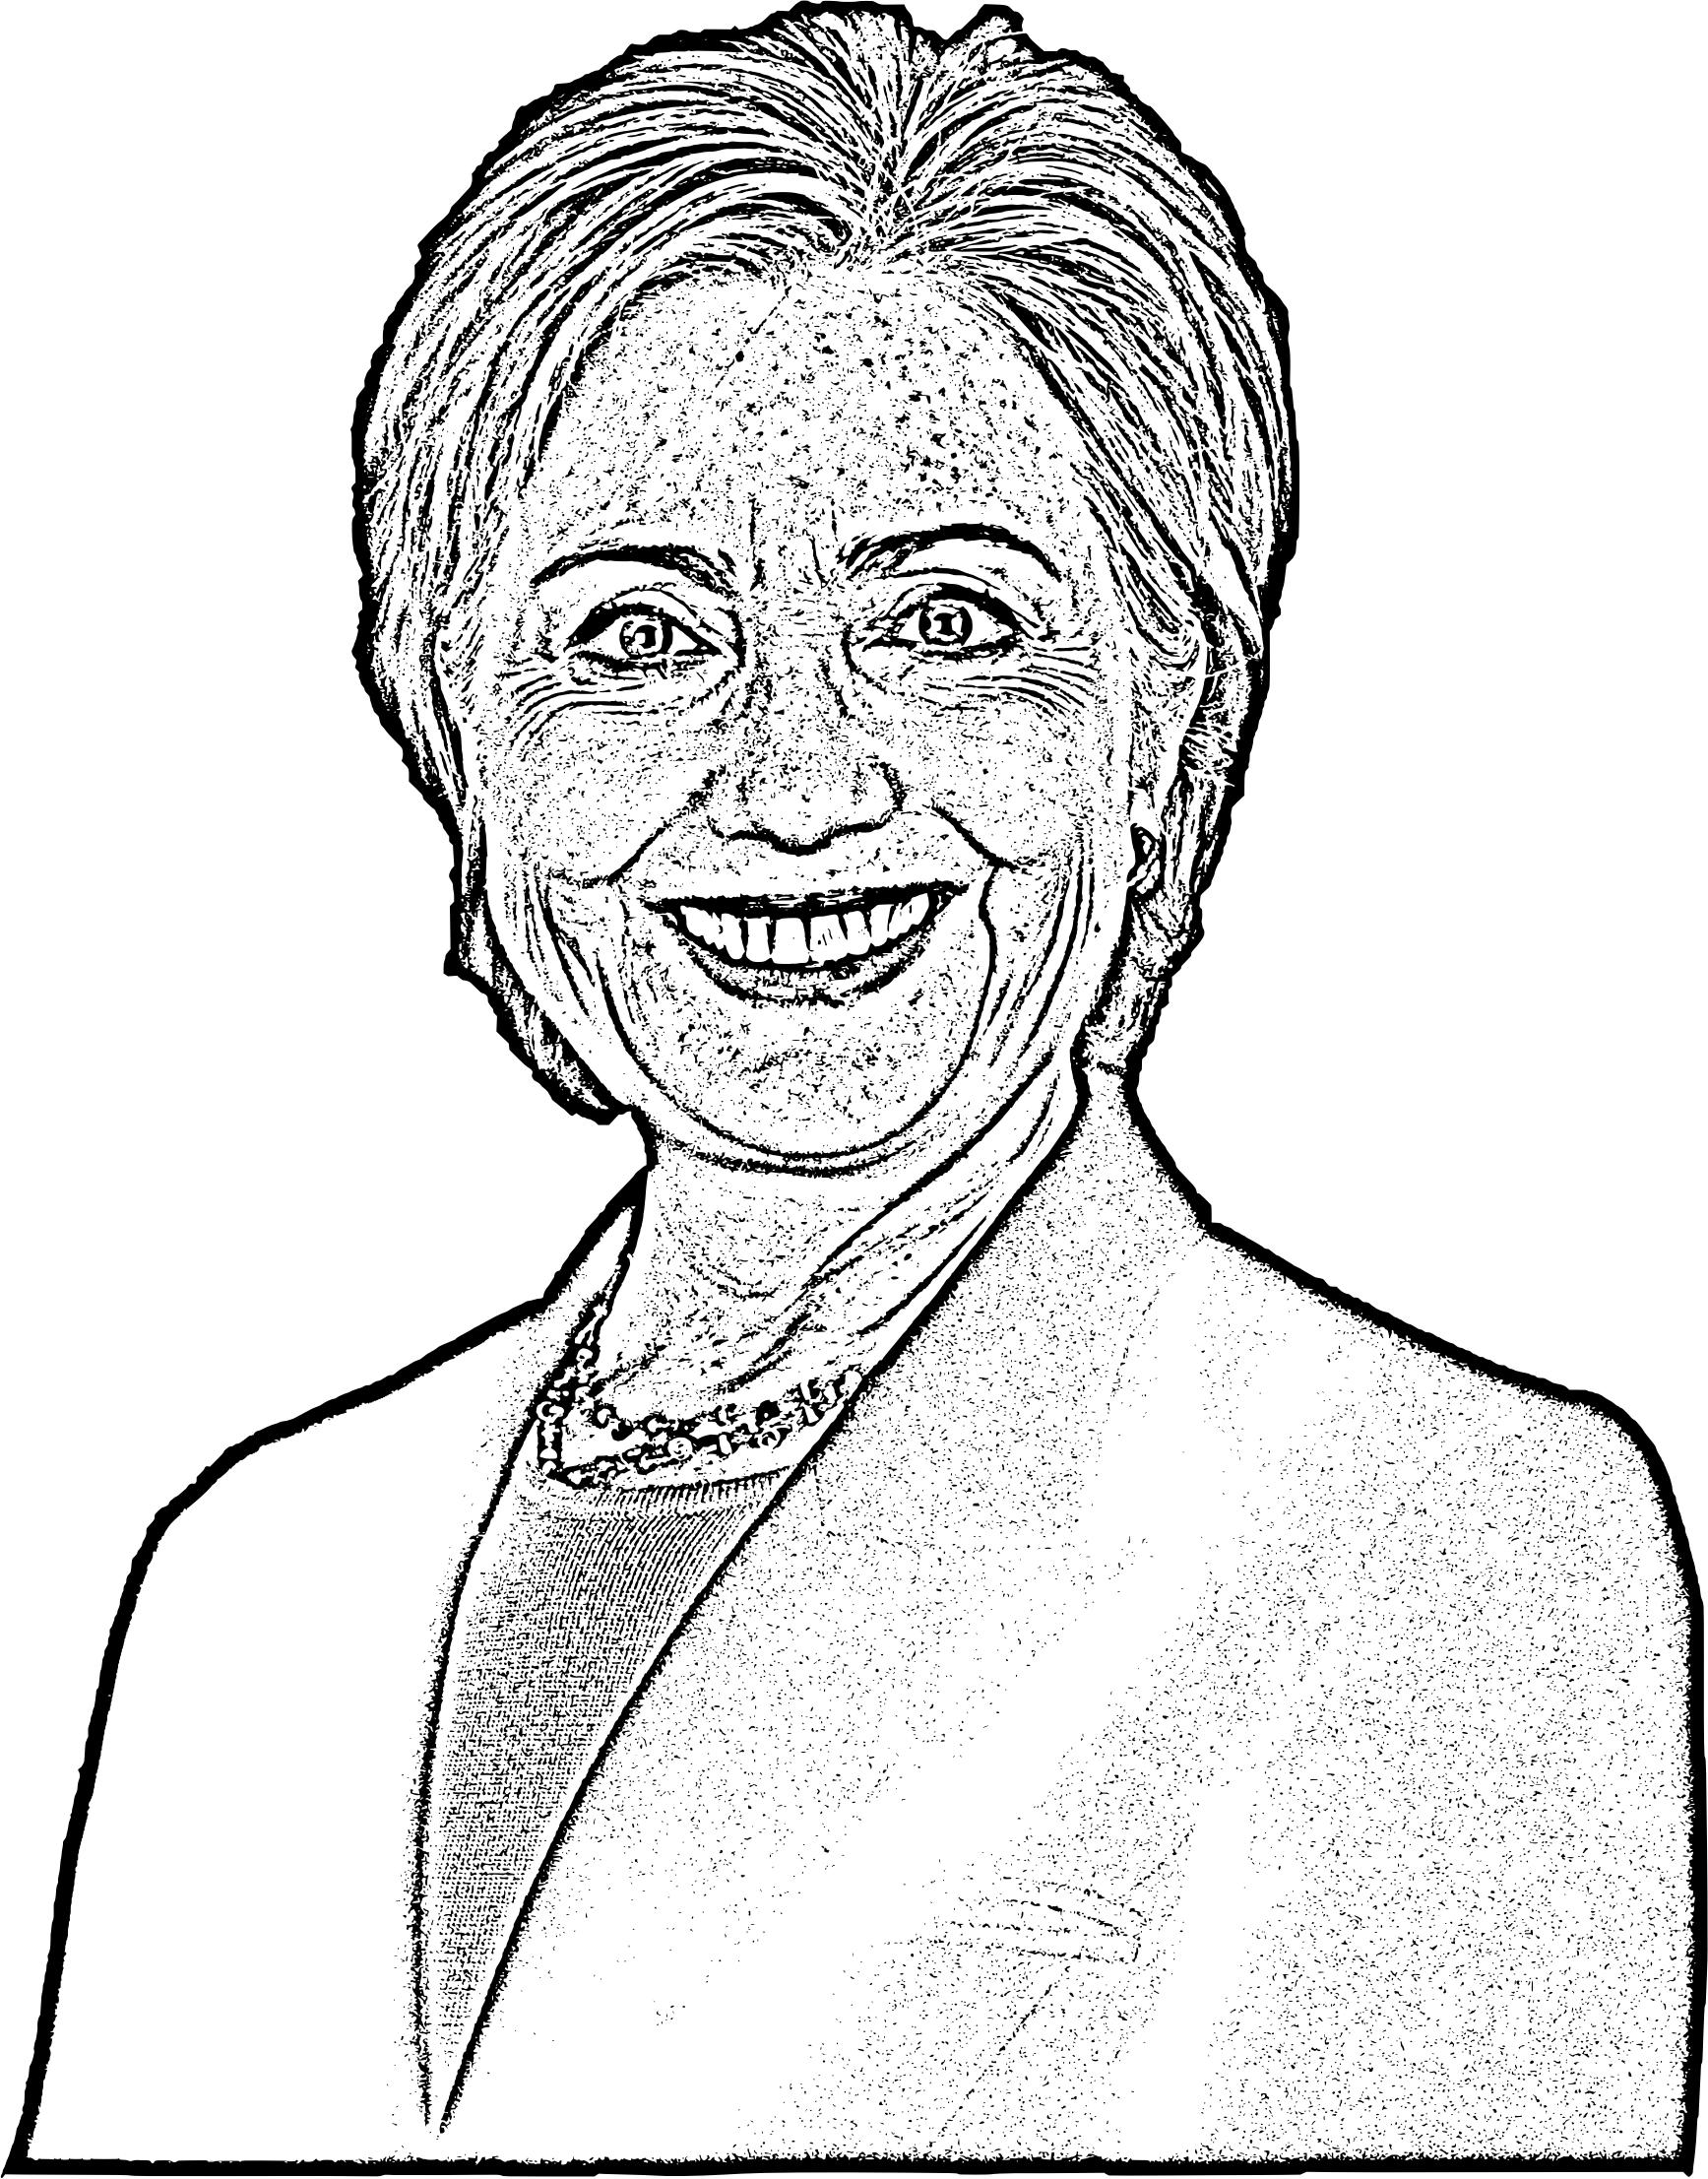 Hillary Clinton as President of the United States (Sketch) PNG icons